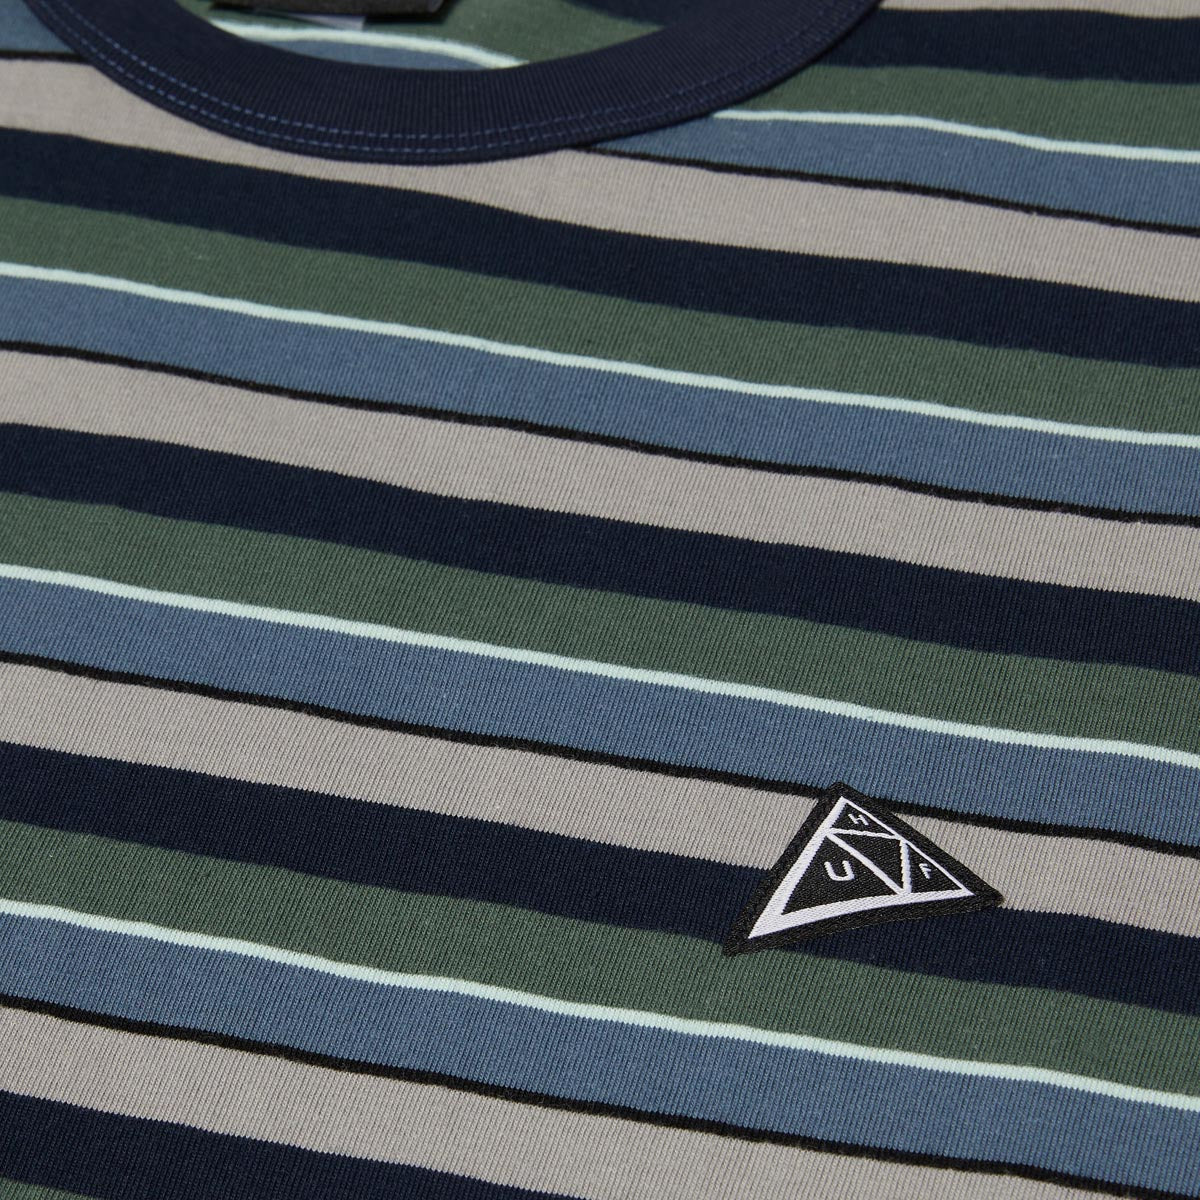 HUF Triple Triangle Relaxed Knit Shirt - Oil Blue image 3